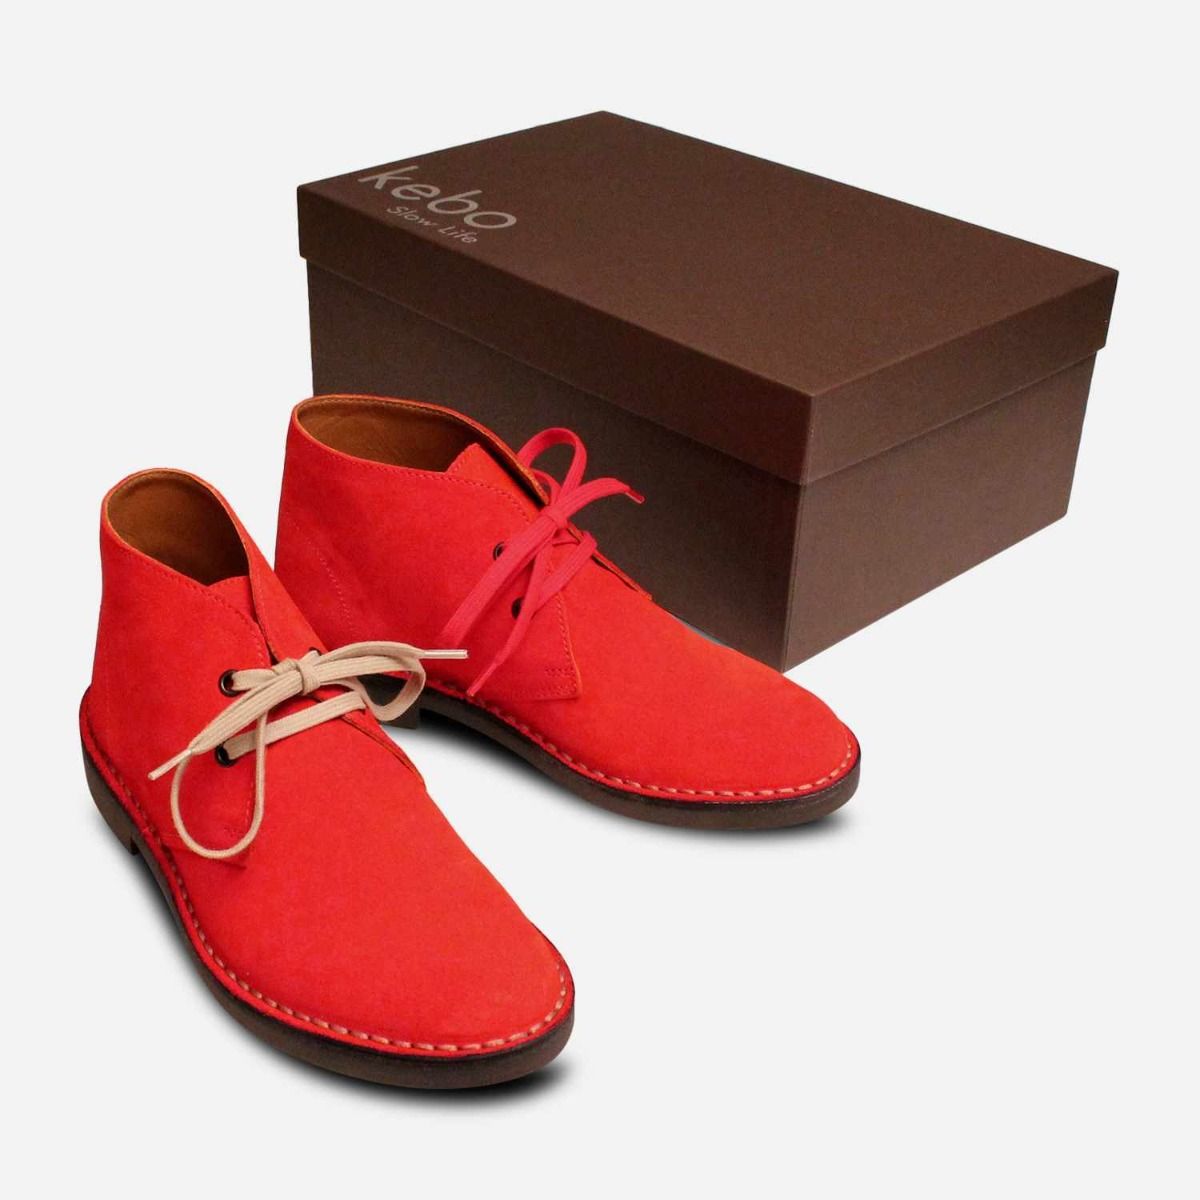 Tectonic Hong Kong autobiography Berry Red Suede Womens Italian Desert Boots